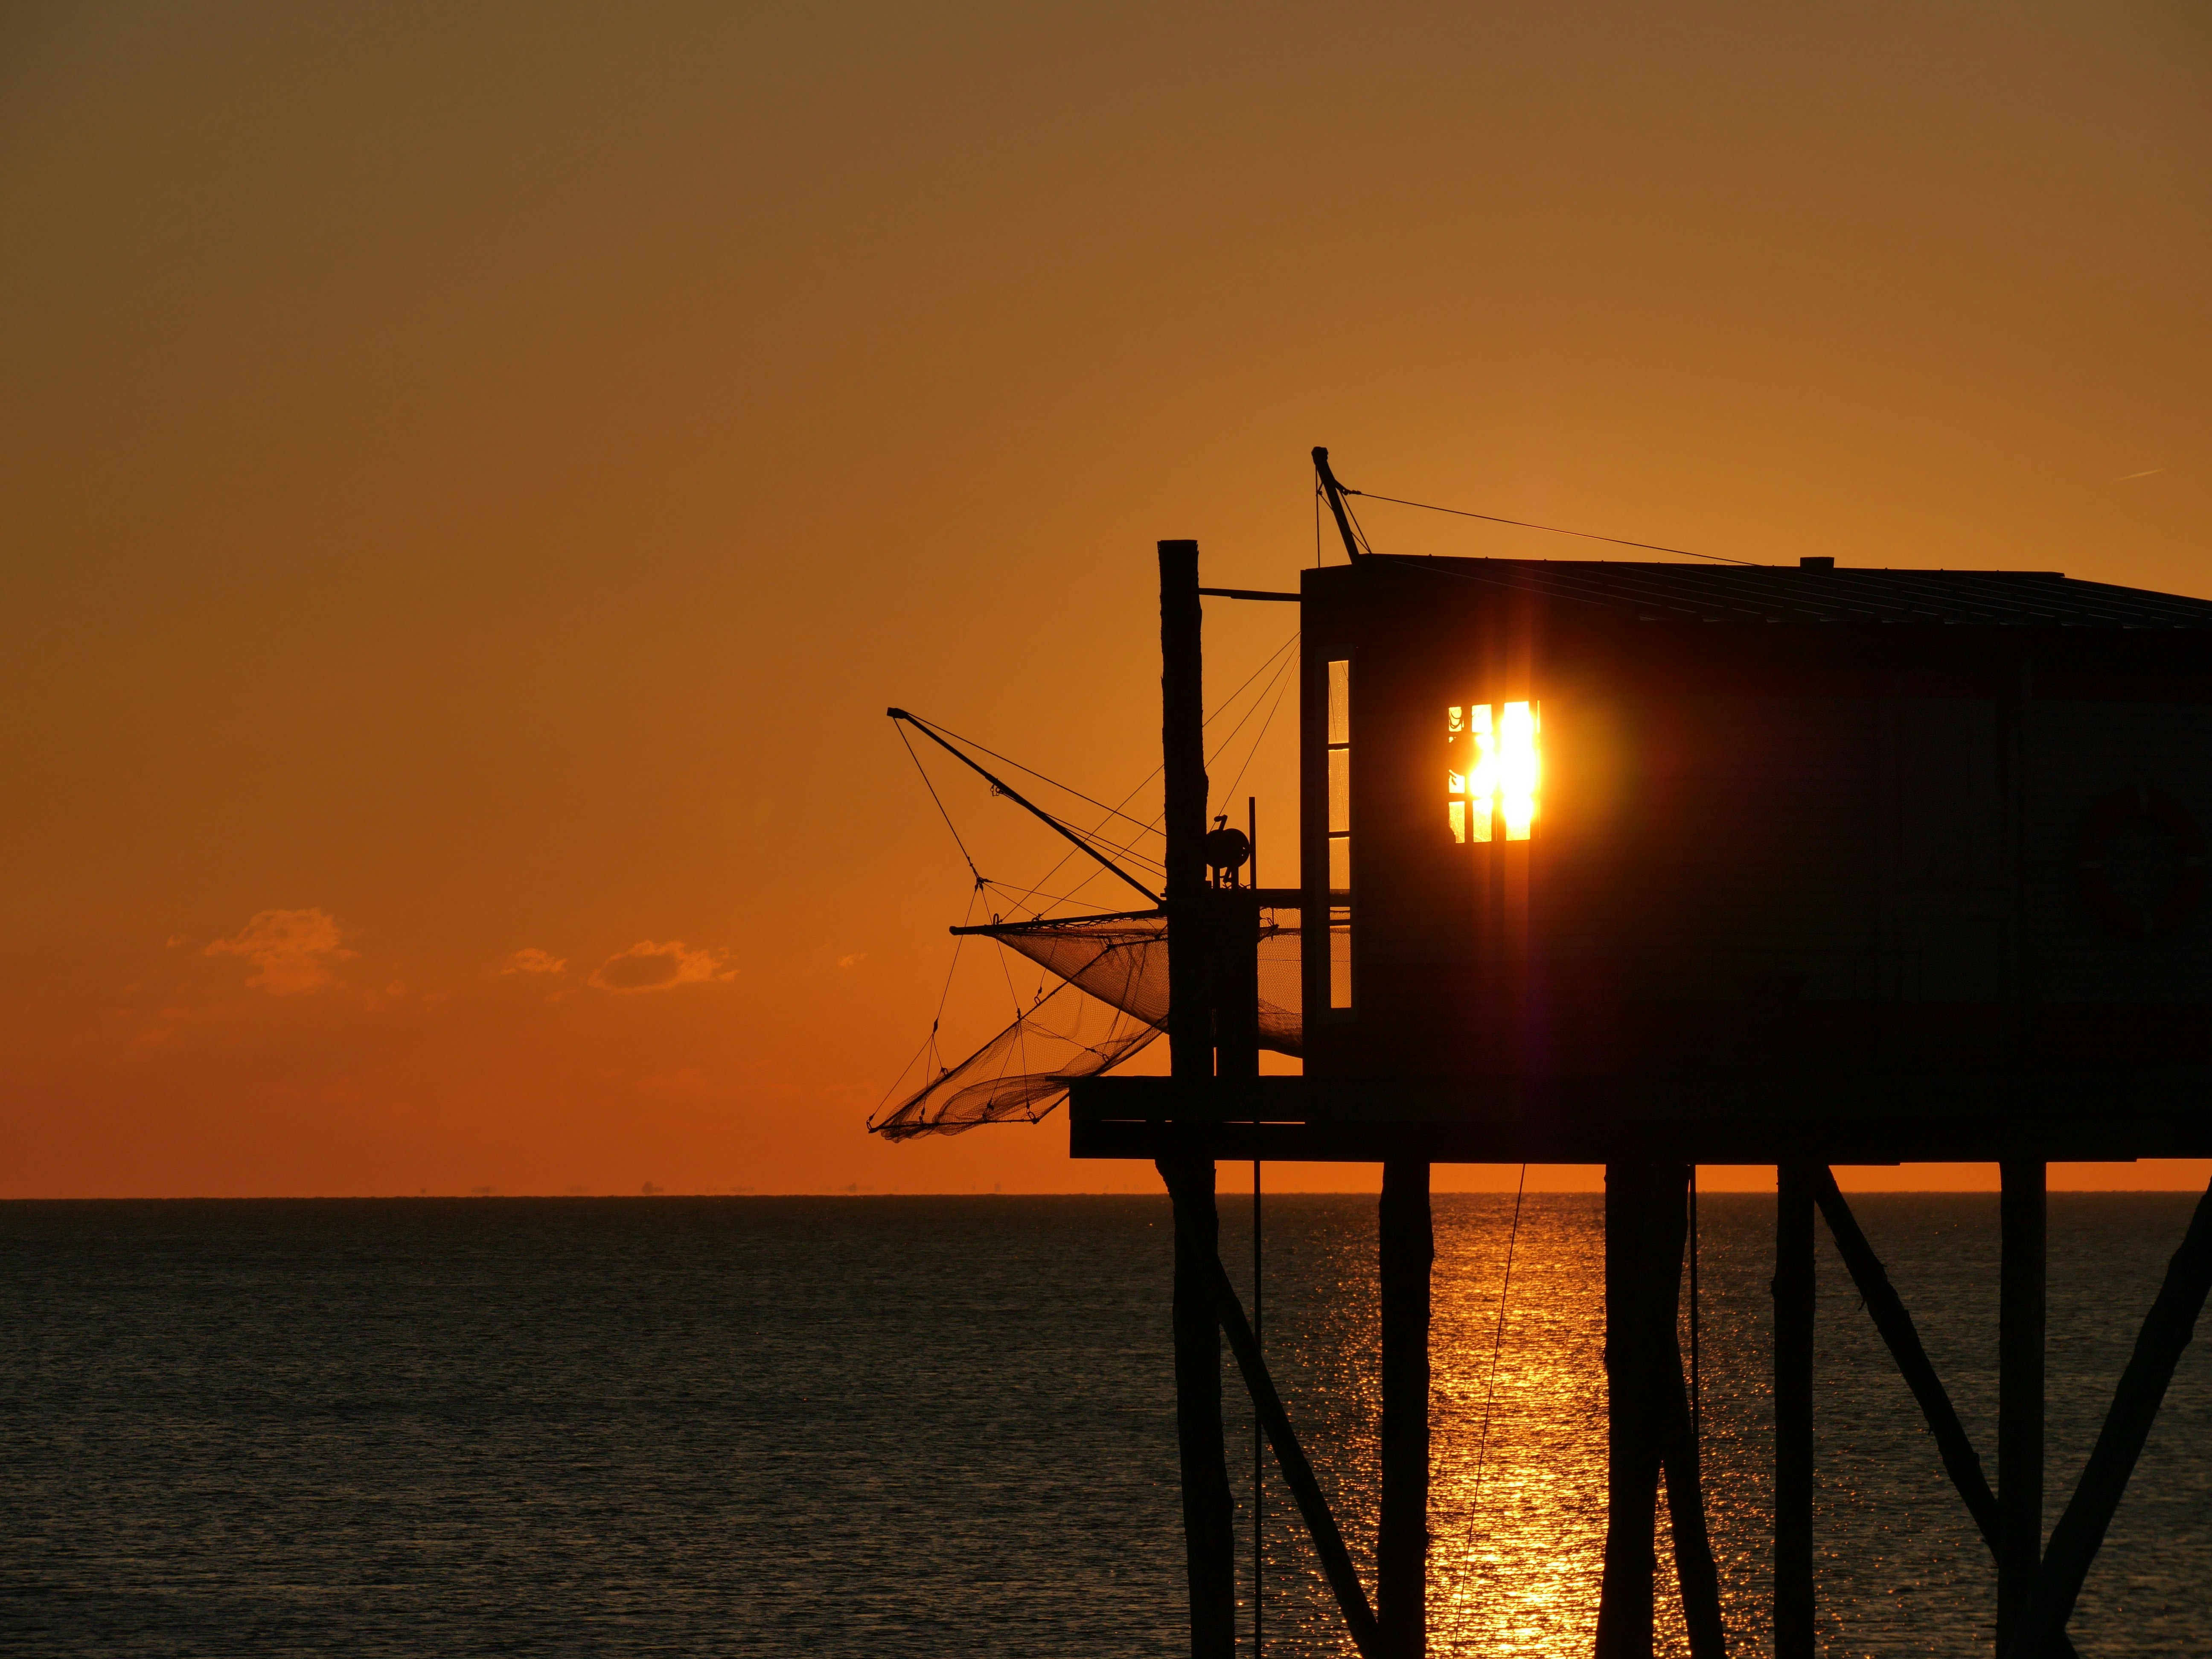 silhouette of a person standing on a wooden dock during sunset